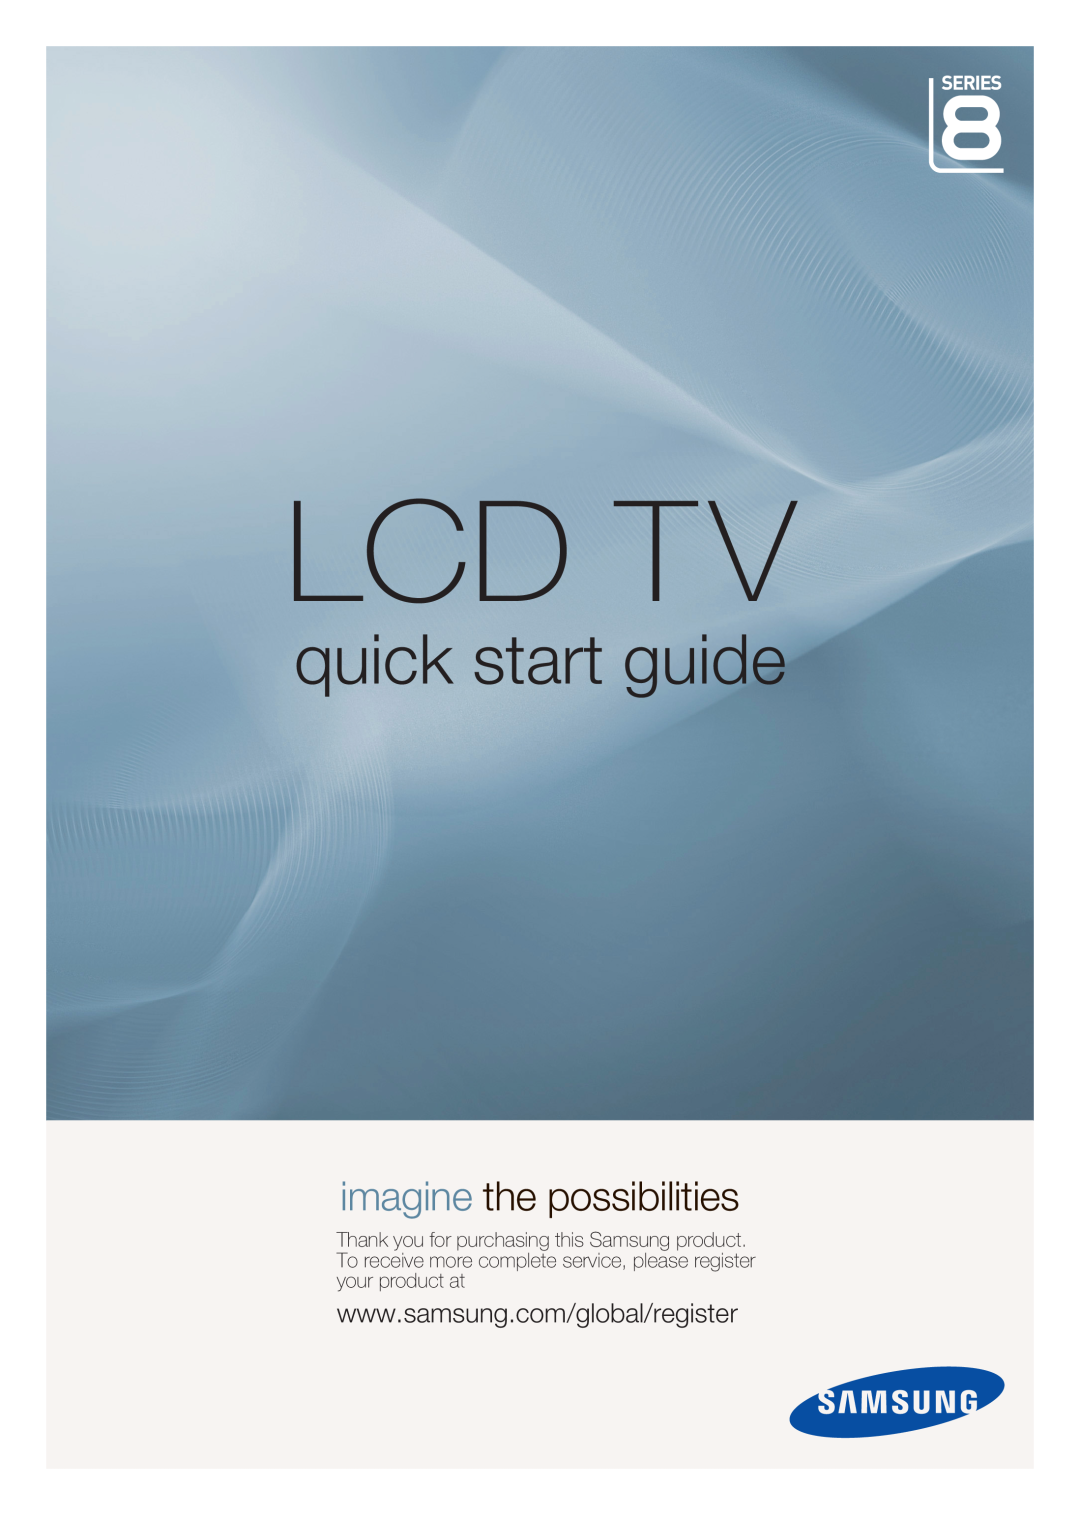 Samsung K-400 quick start Lcd Tv, quick start guide, imagine the possibilities 